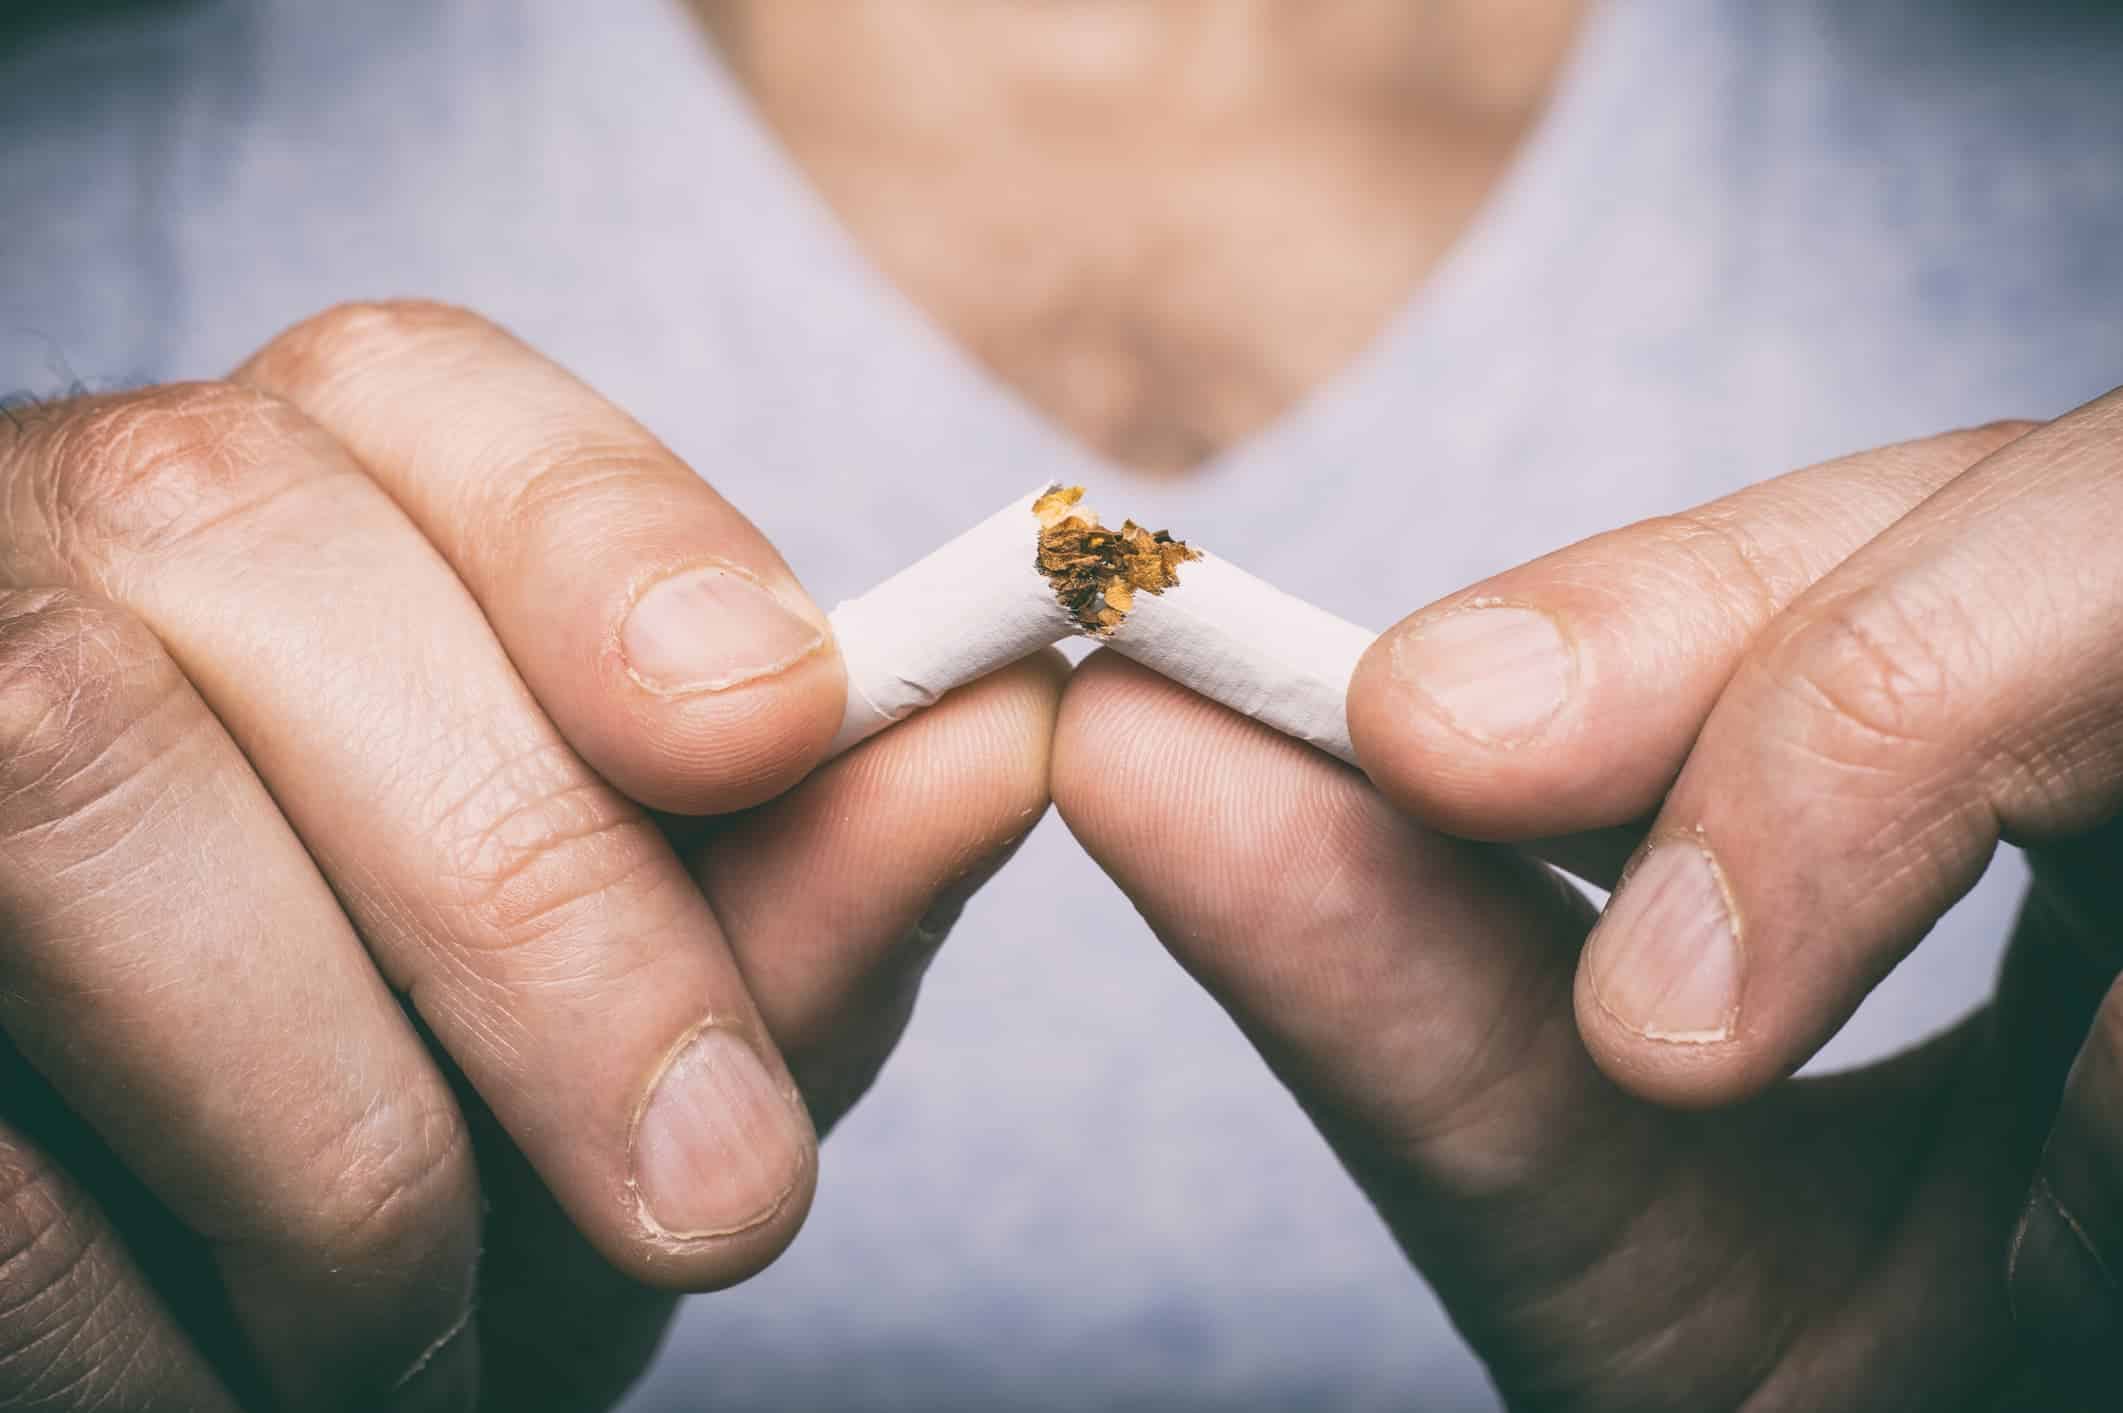 Smoking Success: 7 Powerful Transformations After Quitting”